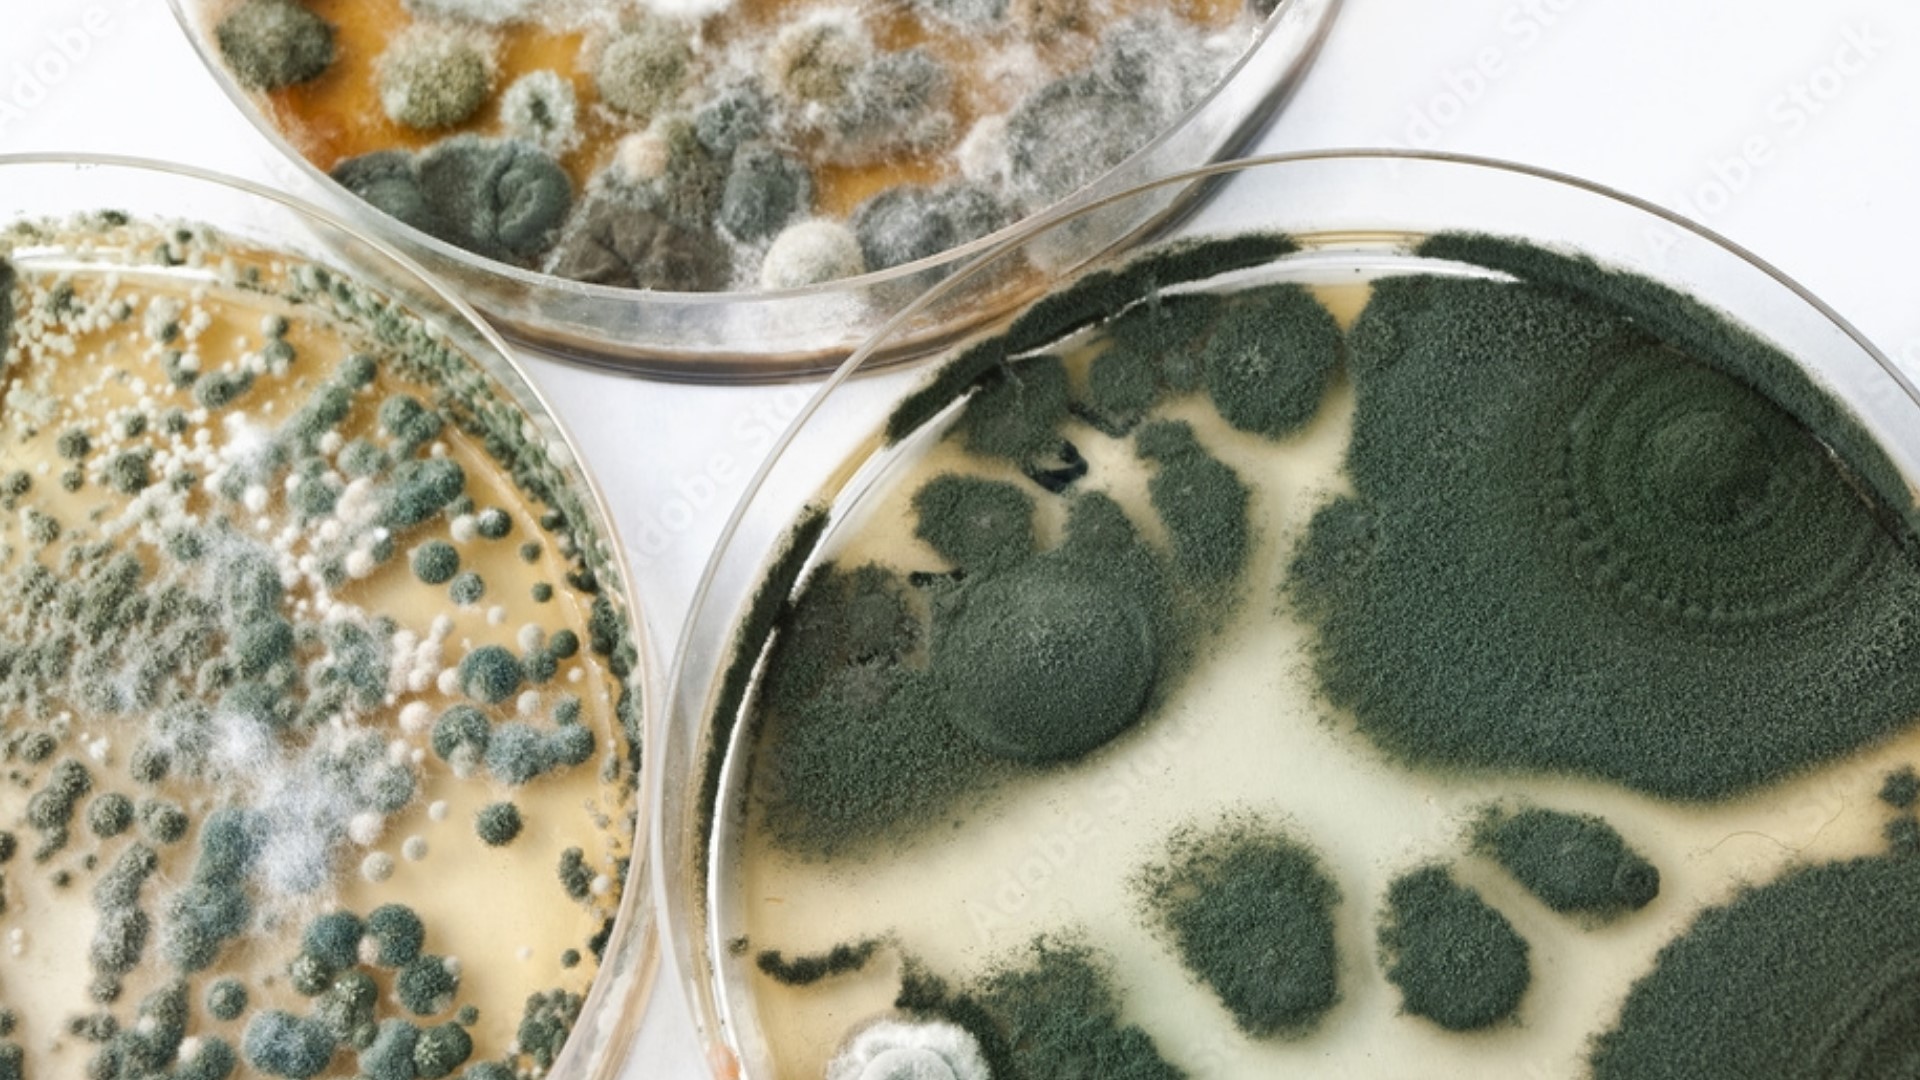 As ABSS works to clean up mold in their buildings, a national expert says "mold is everywhere"